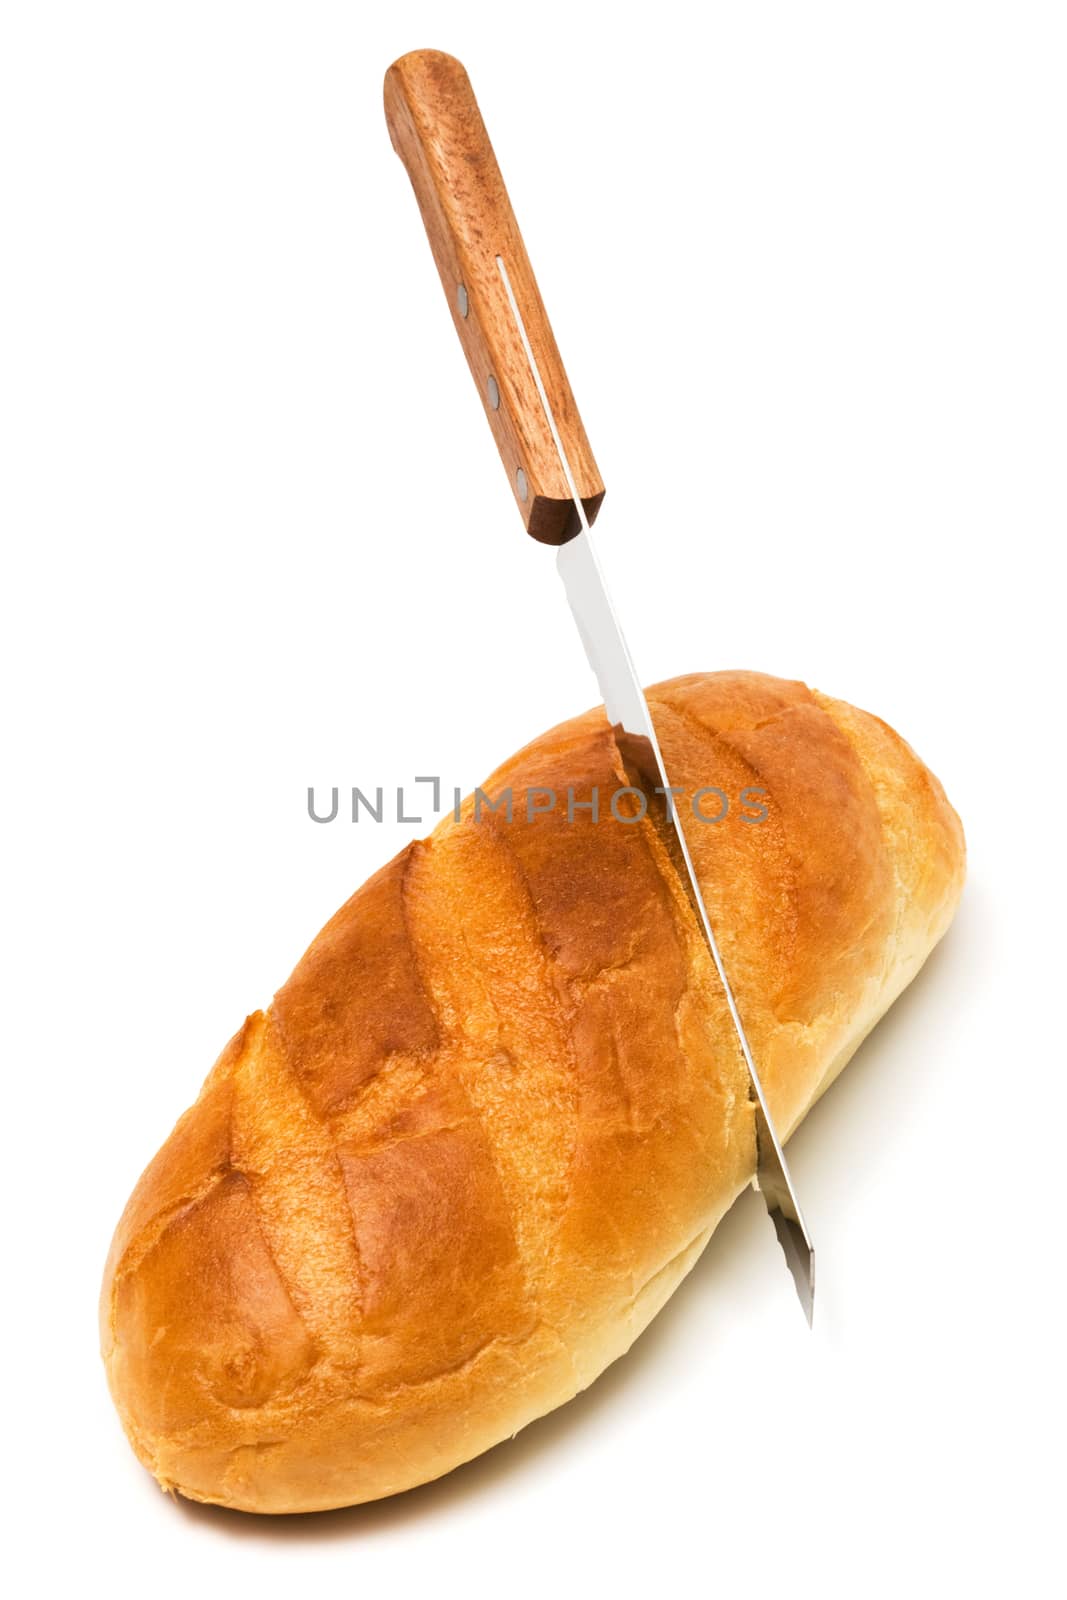 Fresh bread and knife on a white background